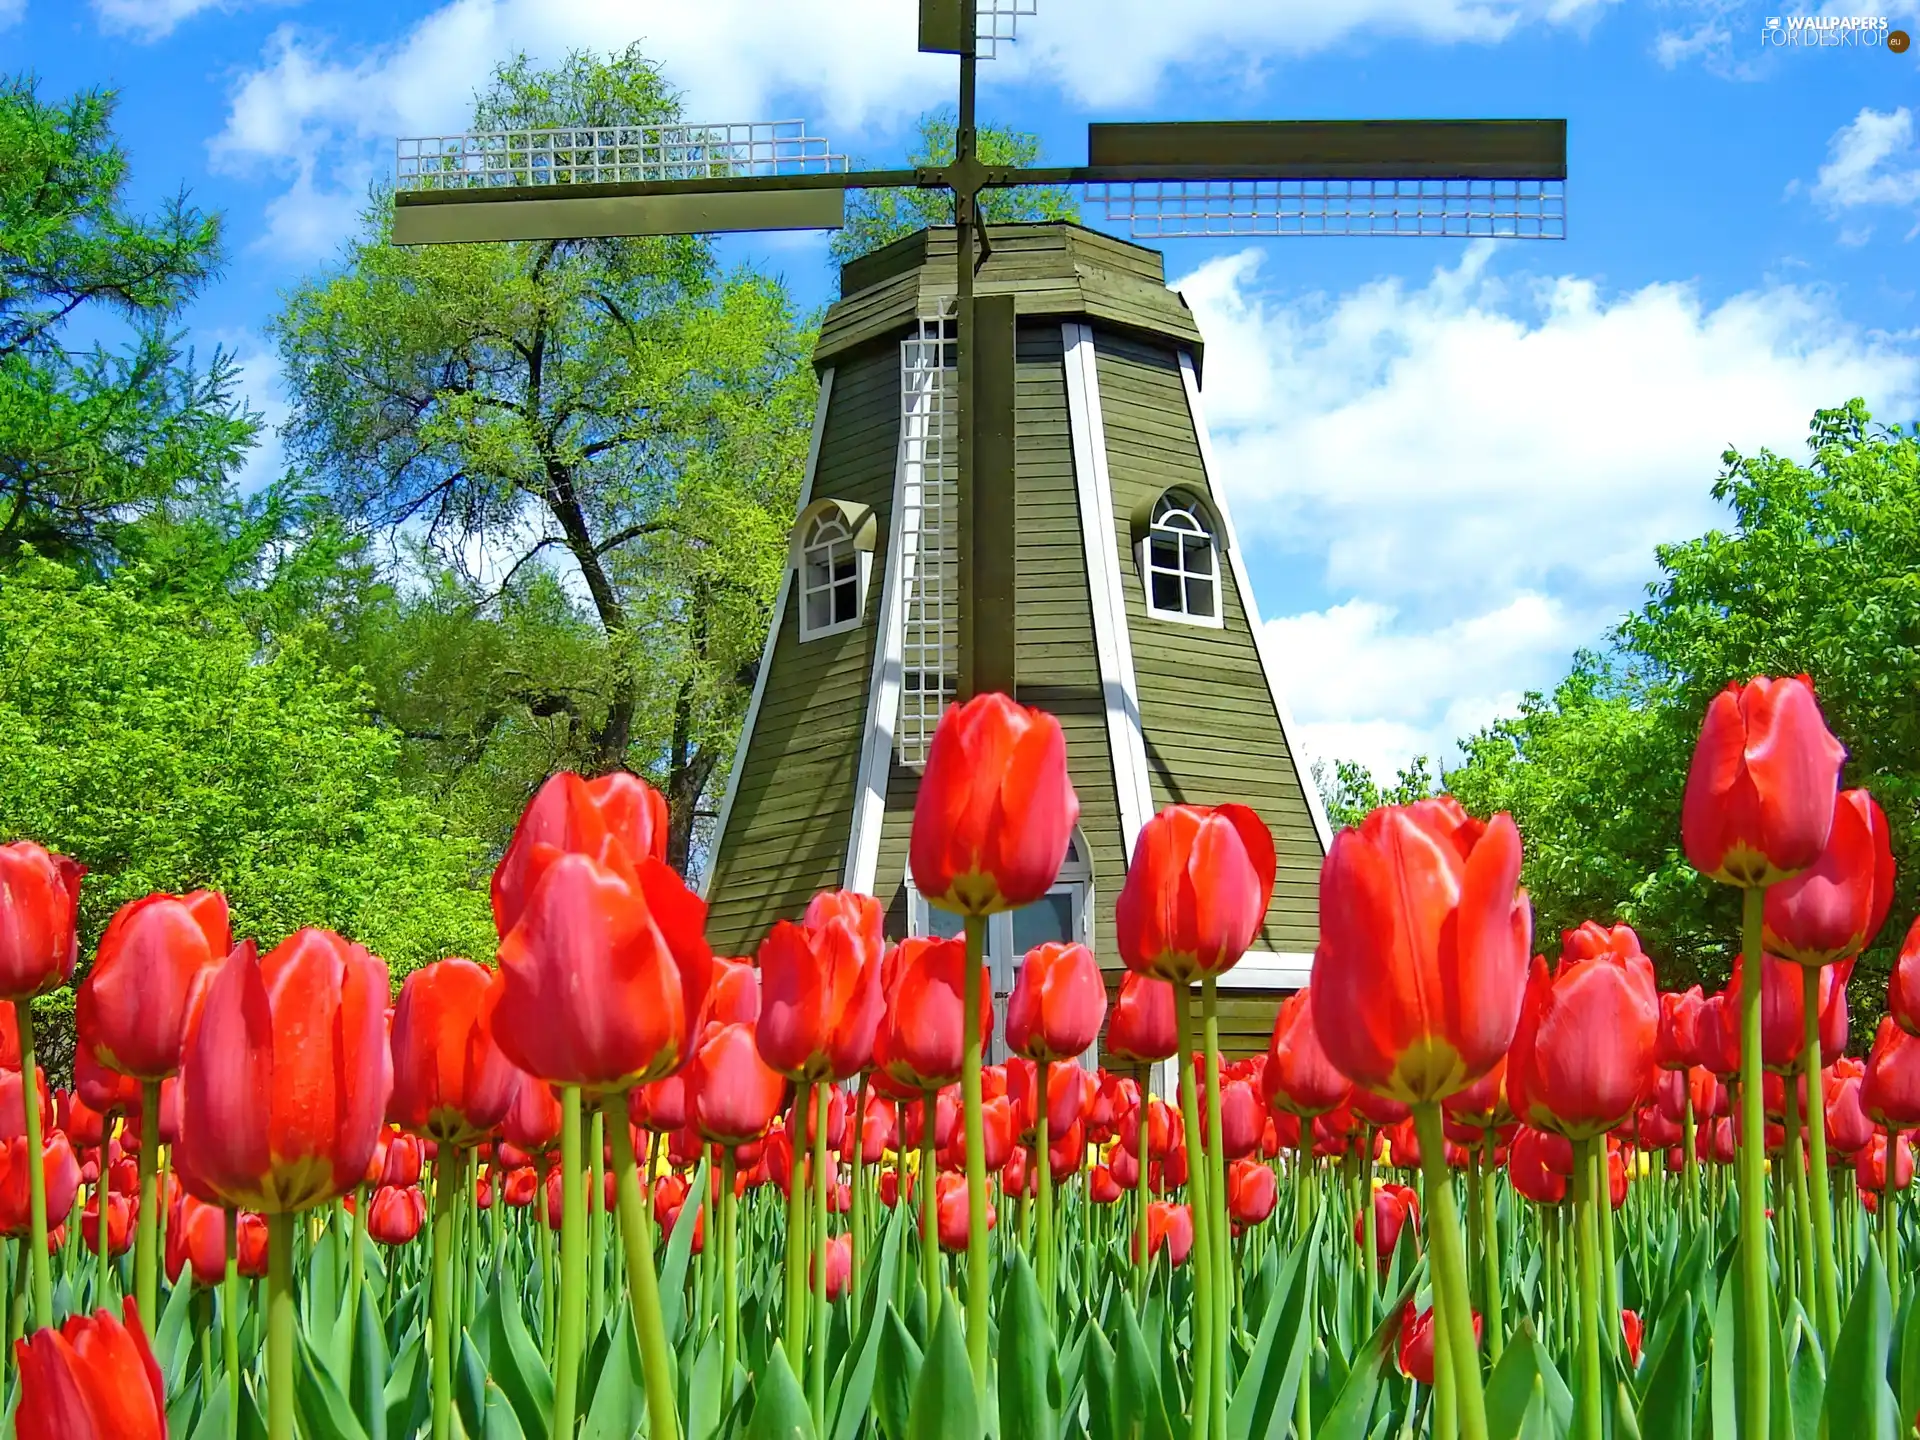 Tulips, Windmill, Red